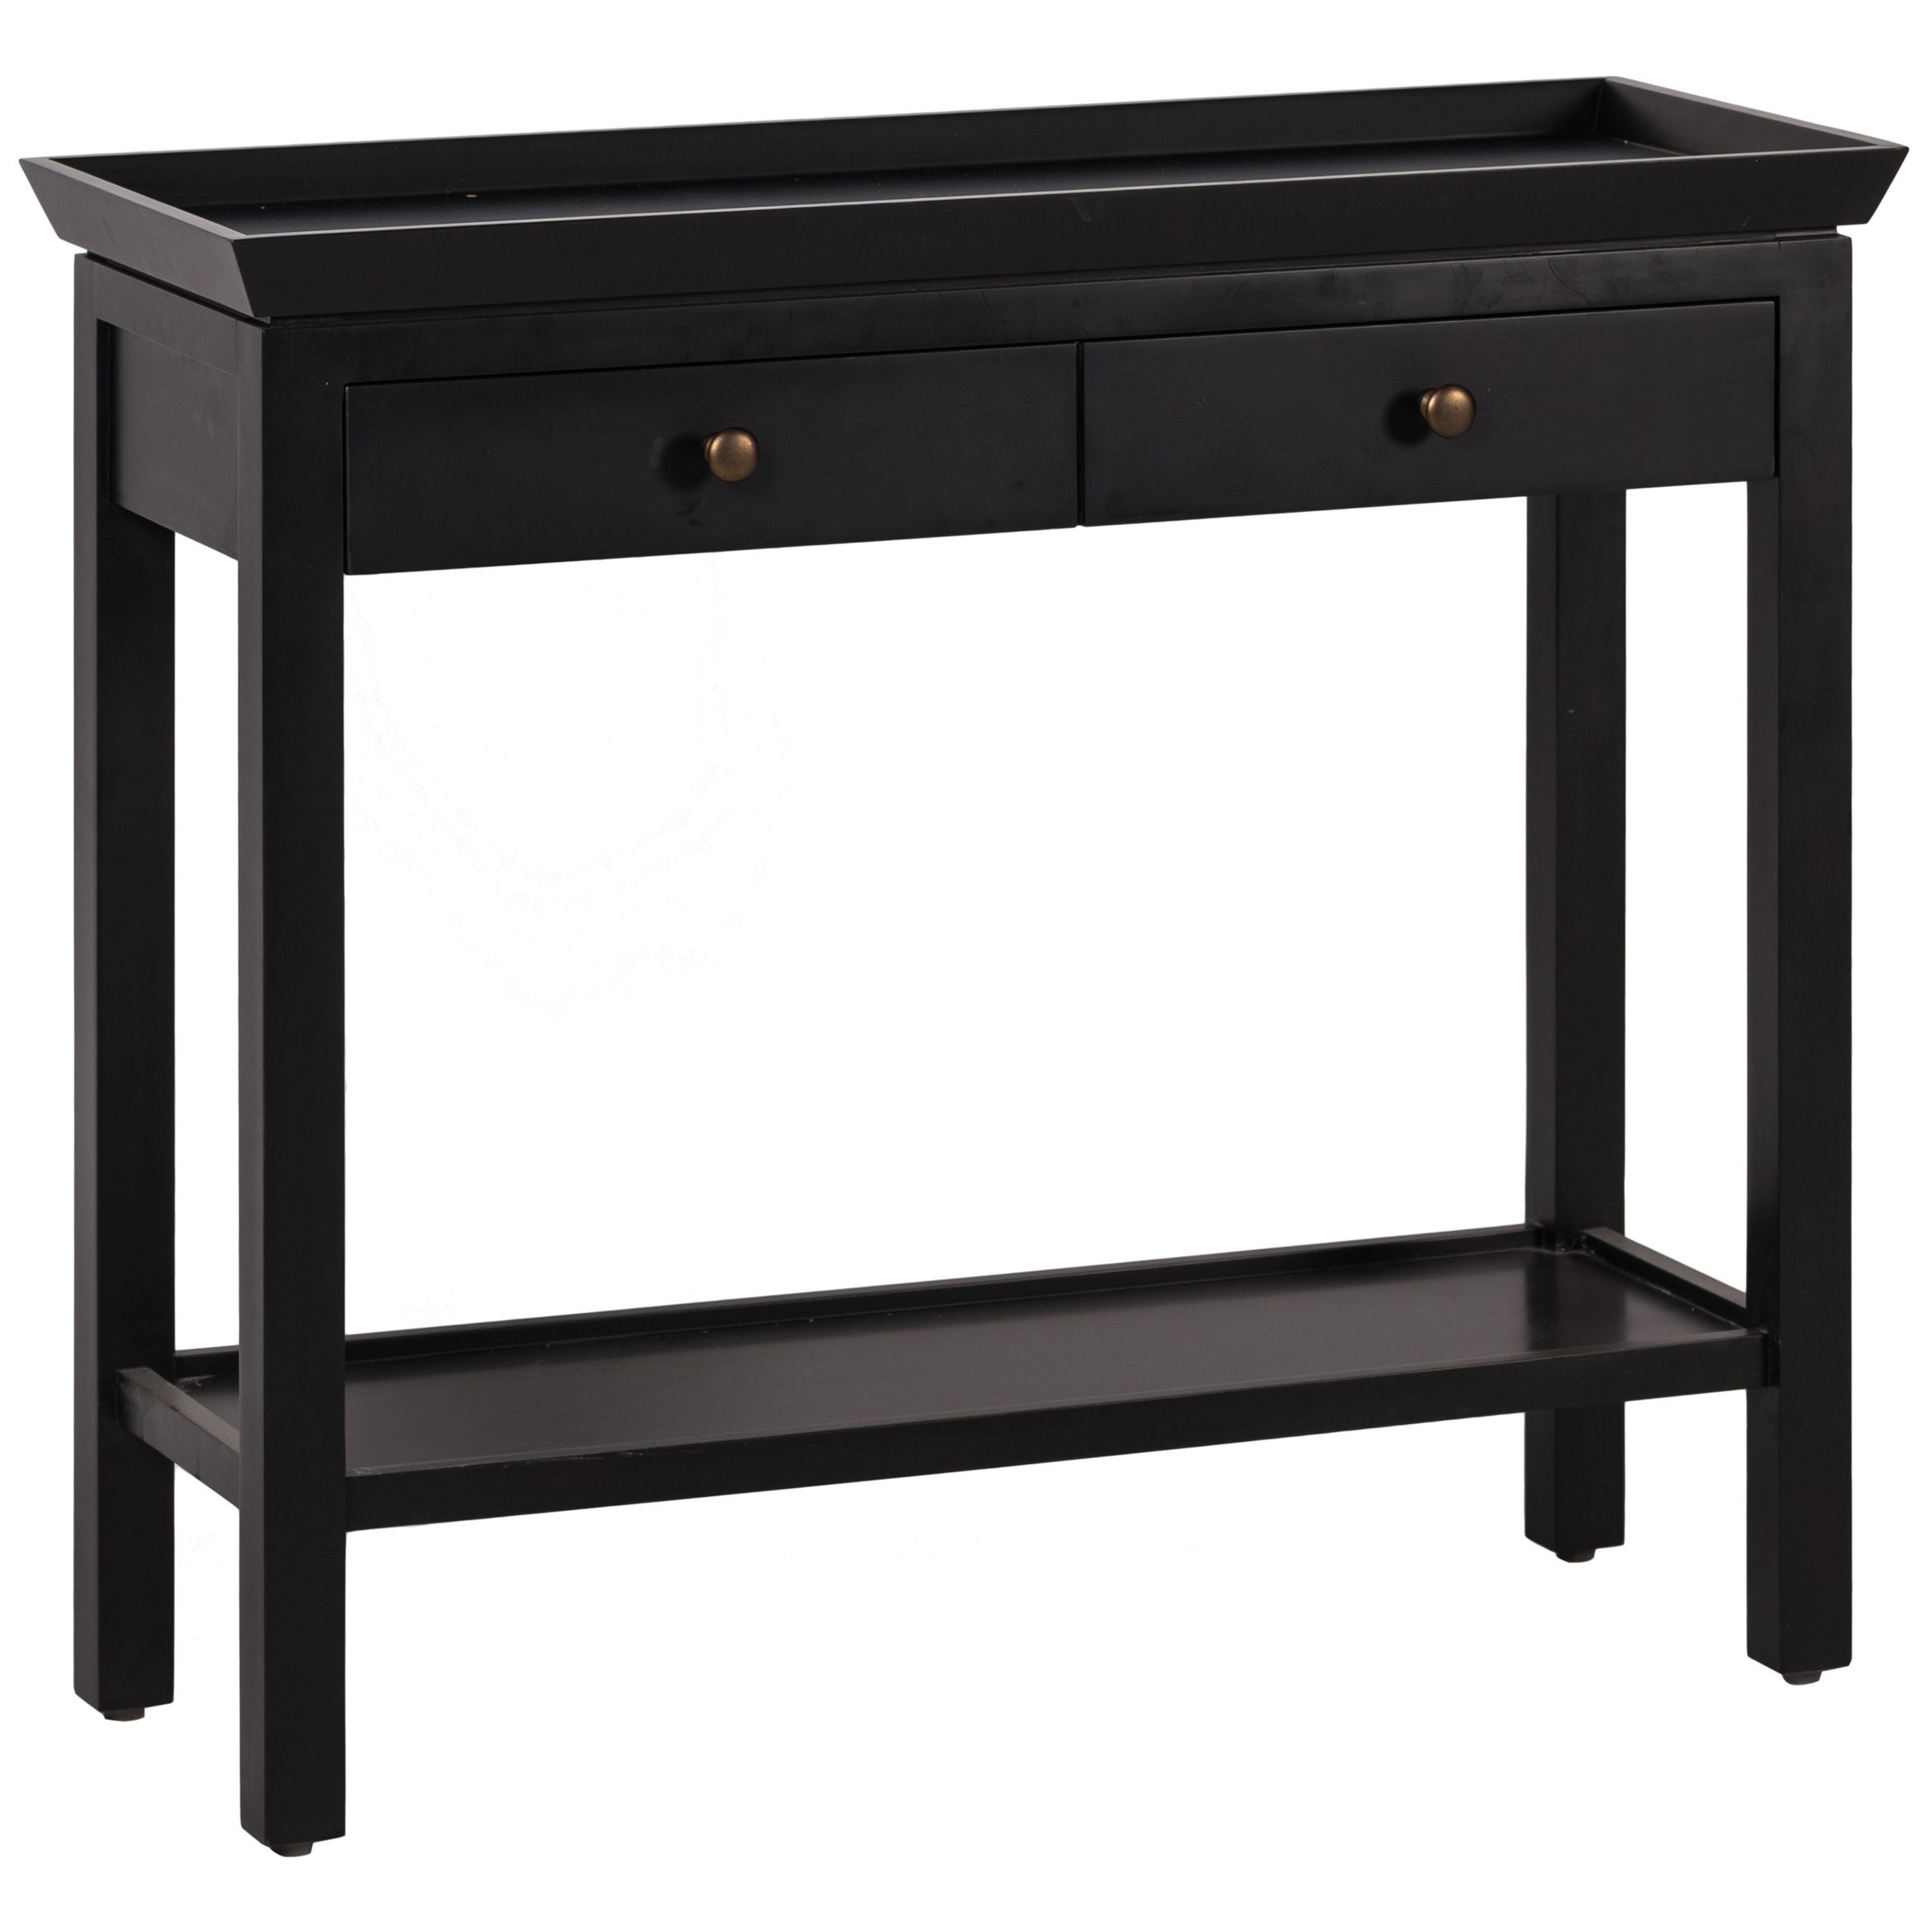 Neptune Aldwych Small Console Table, Warm Black at John Lewis & Partners